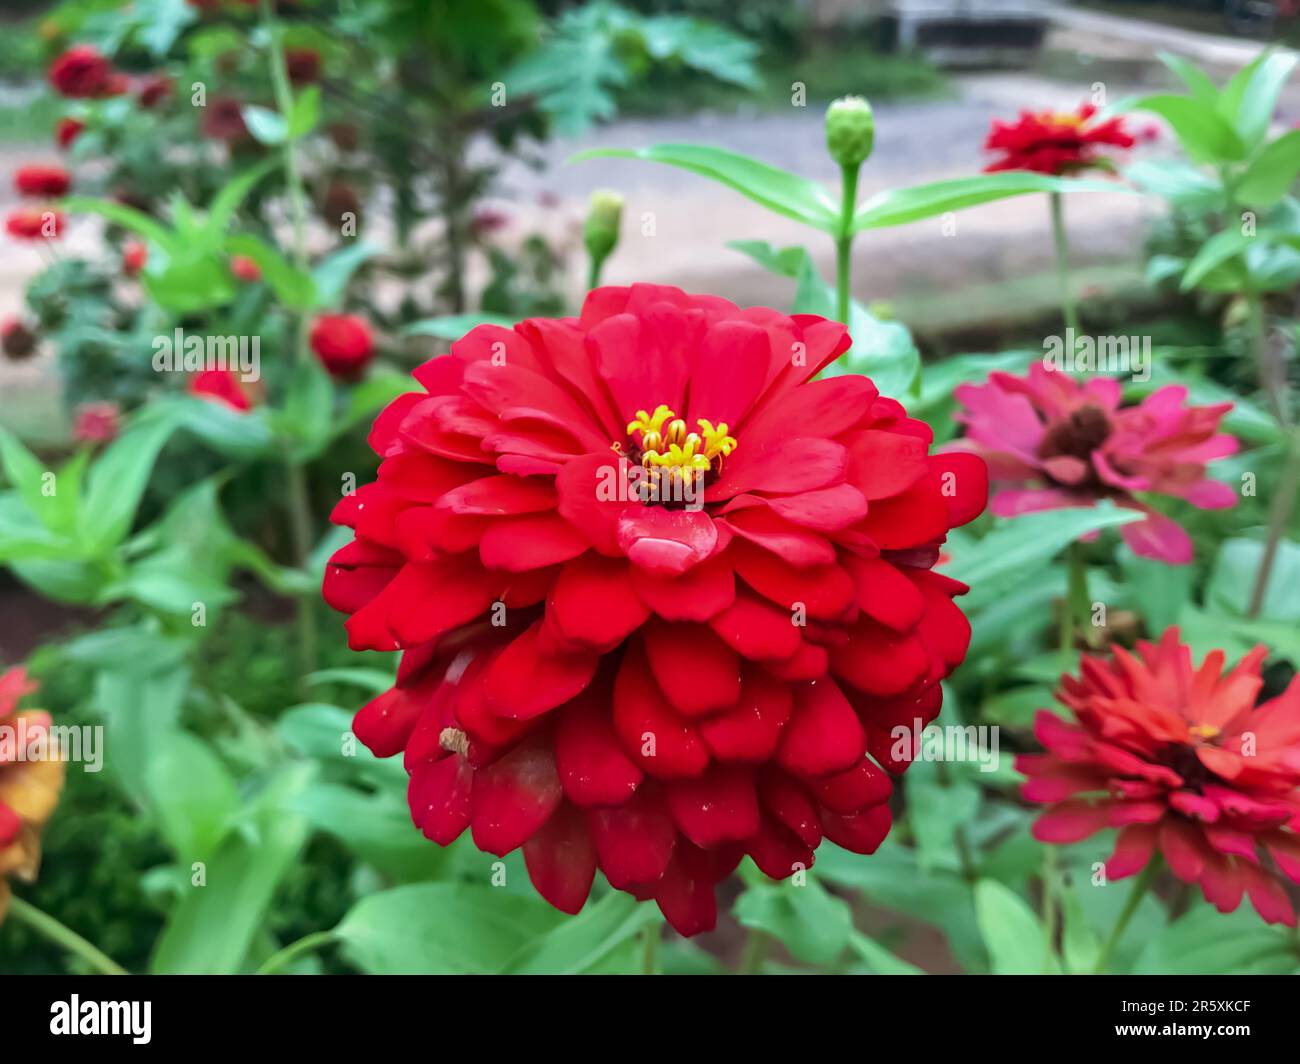 Blooming red flowers are a beautiful sight to behold, with their vibrant color and delicate petals. These flowers come in many different varieties, fr Stock Photo